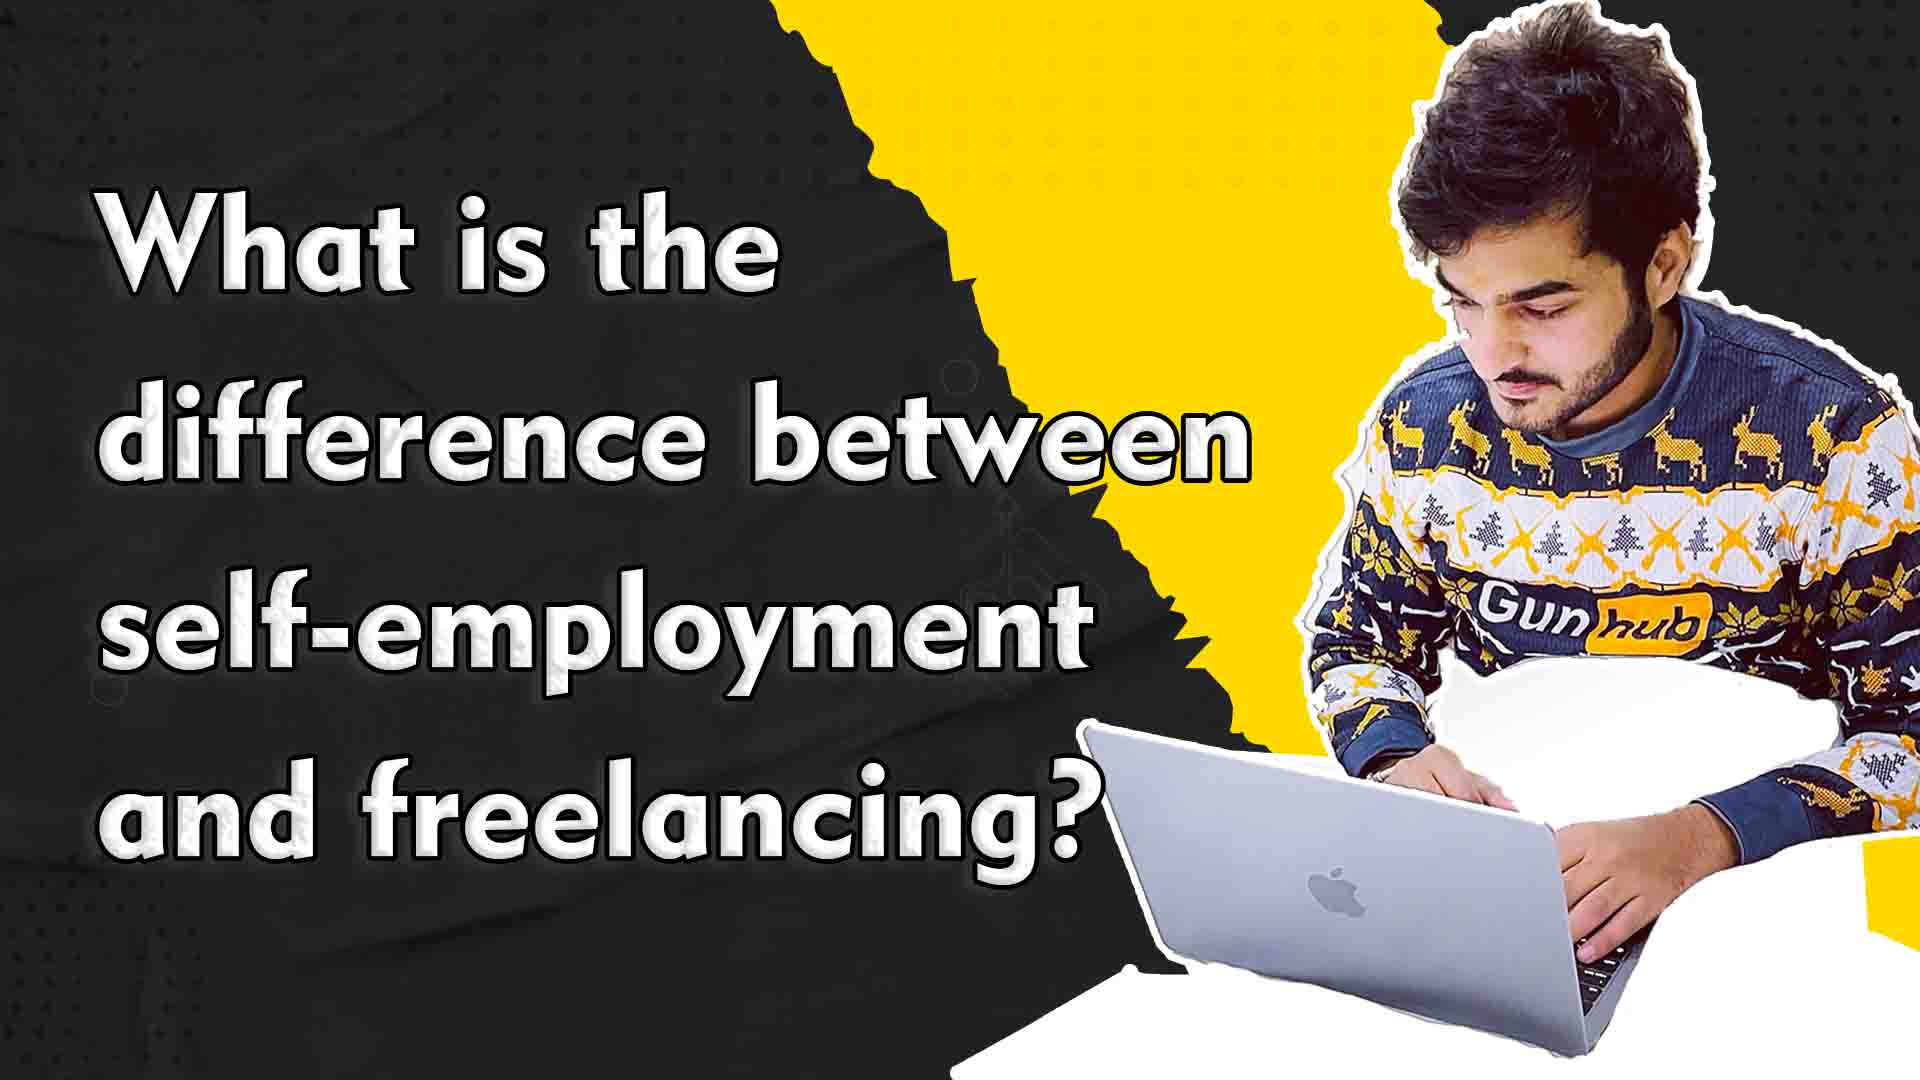 What is the difference between self-employment and freelancing lat2023?